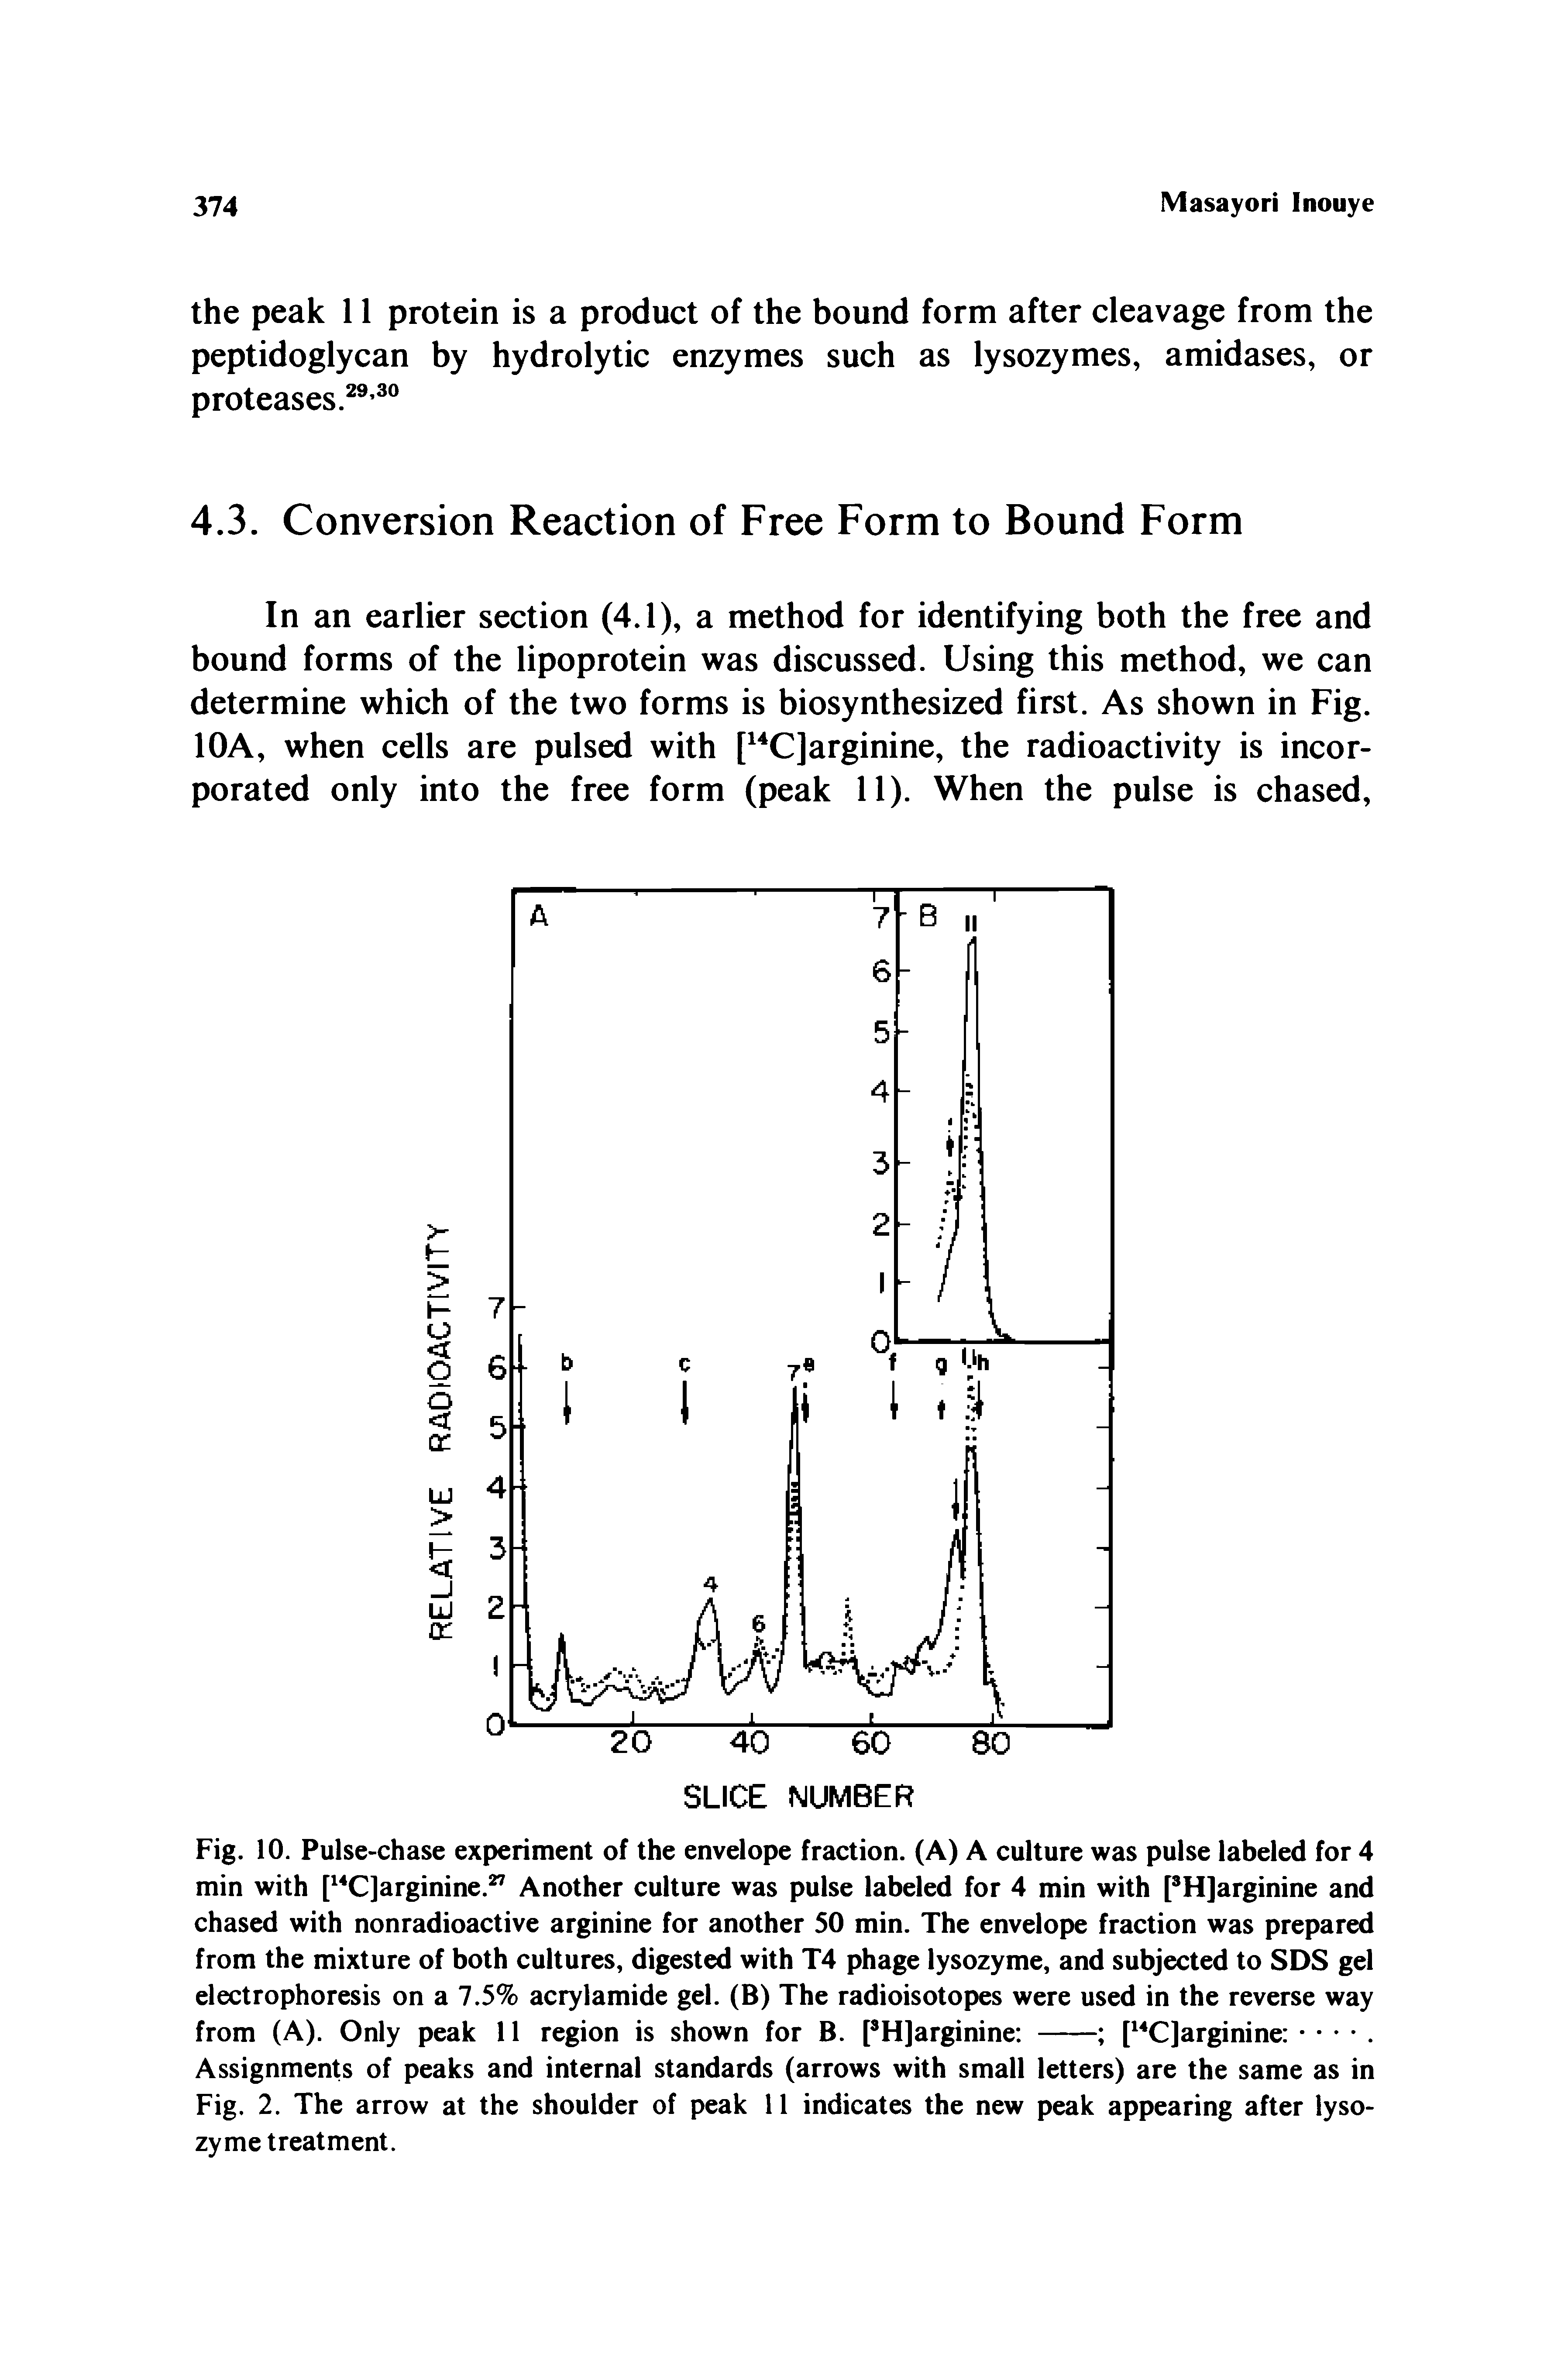 Fig. 10. Pulse-chase experiment of the envelope fraction. (A) A culture was pulse labeled for 4 min with [ C]arginine. Another culture was pulse labeled for 4 min with PH]arginine and chased with nonradioactive arginine for another 50 min. The envelope fraction was prepared from the mixture of both cultures, digested with T4 phage lysozyme, and subjected to SDS gel electrophoresis on a 7.5% acrylamide gel. (B) The radioisotopes were used in the reverse way...